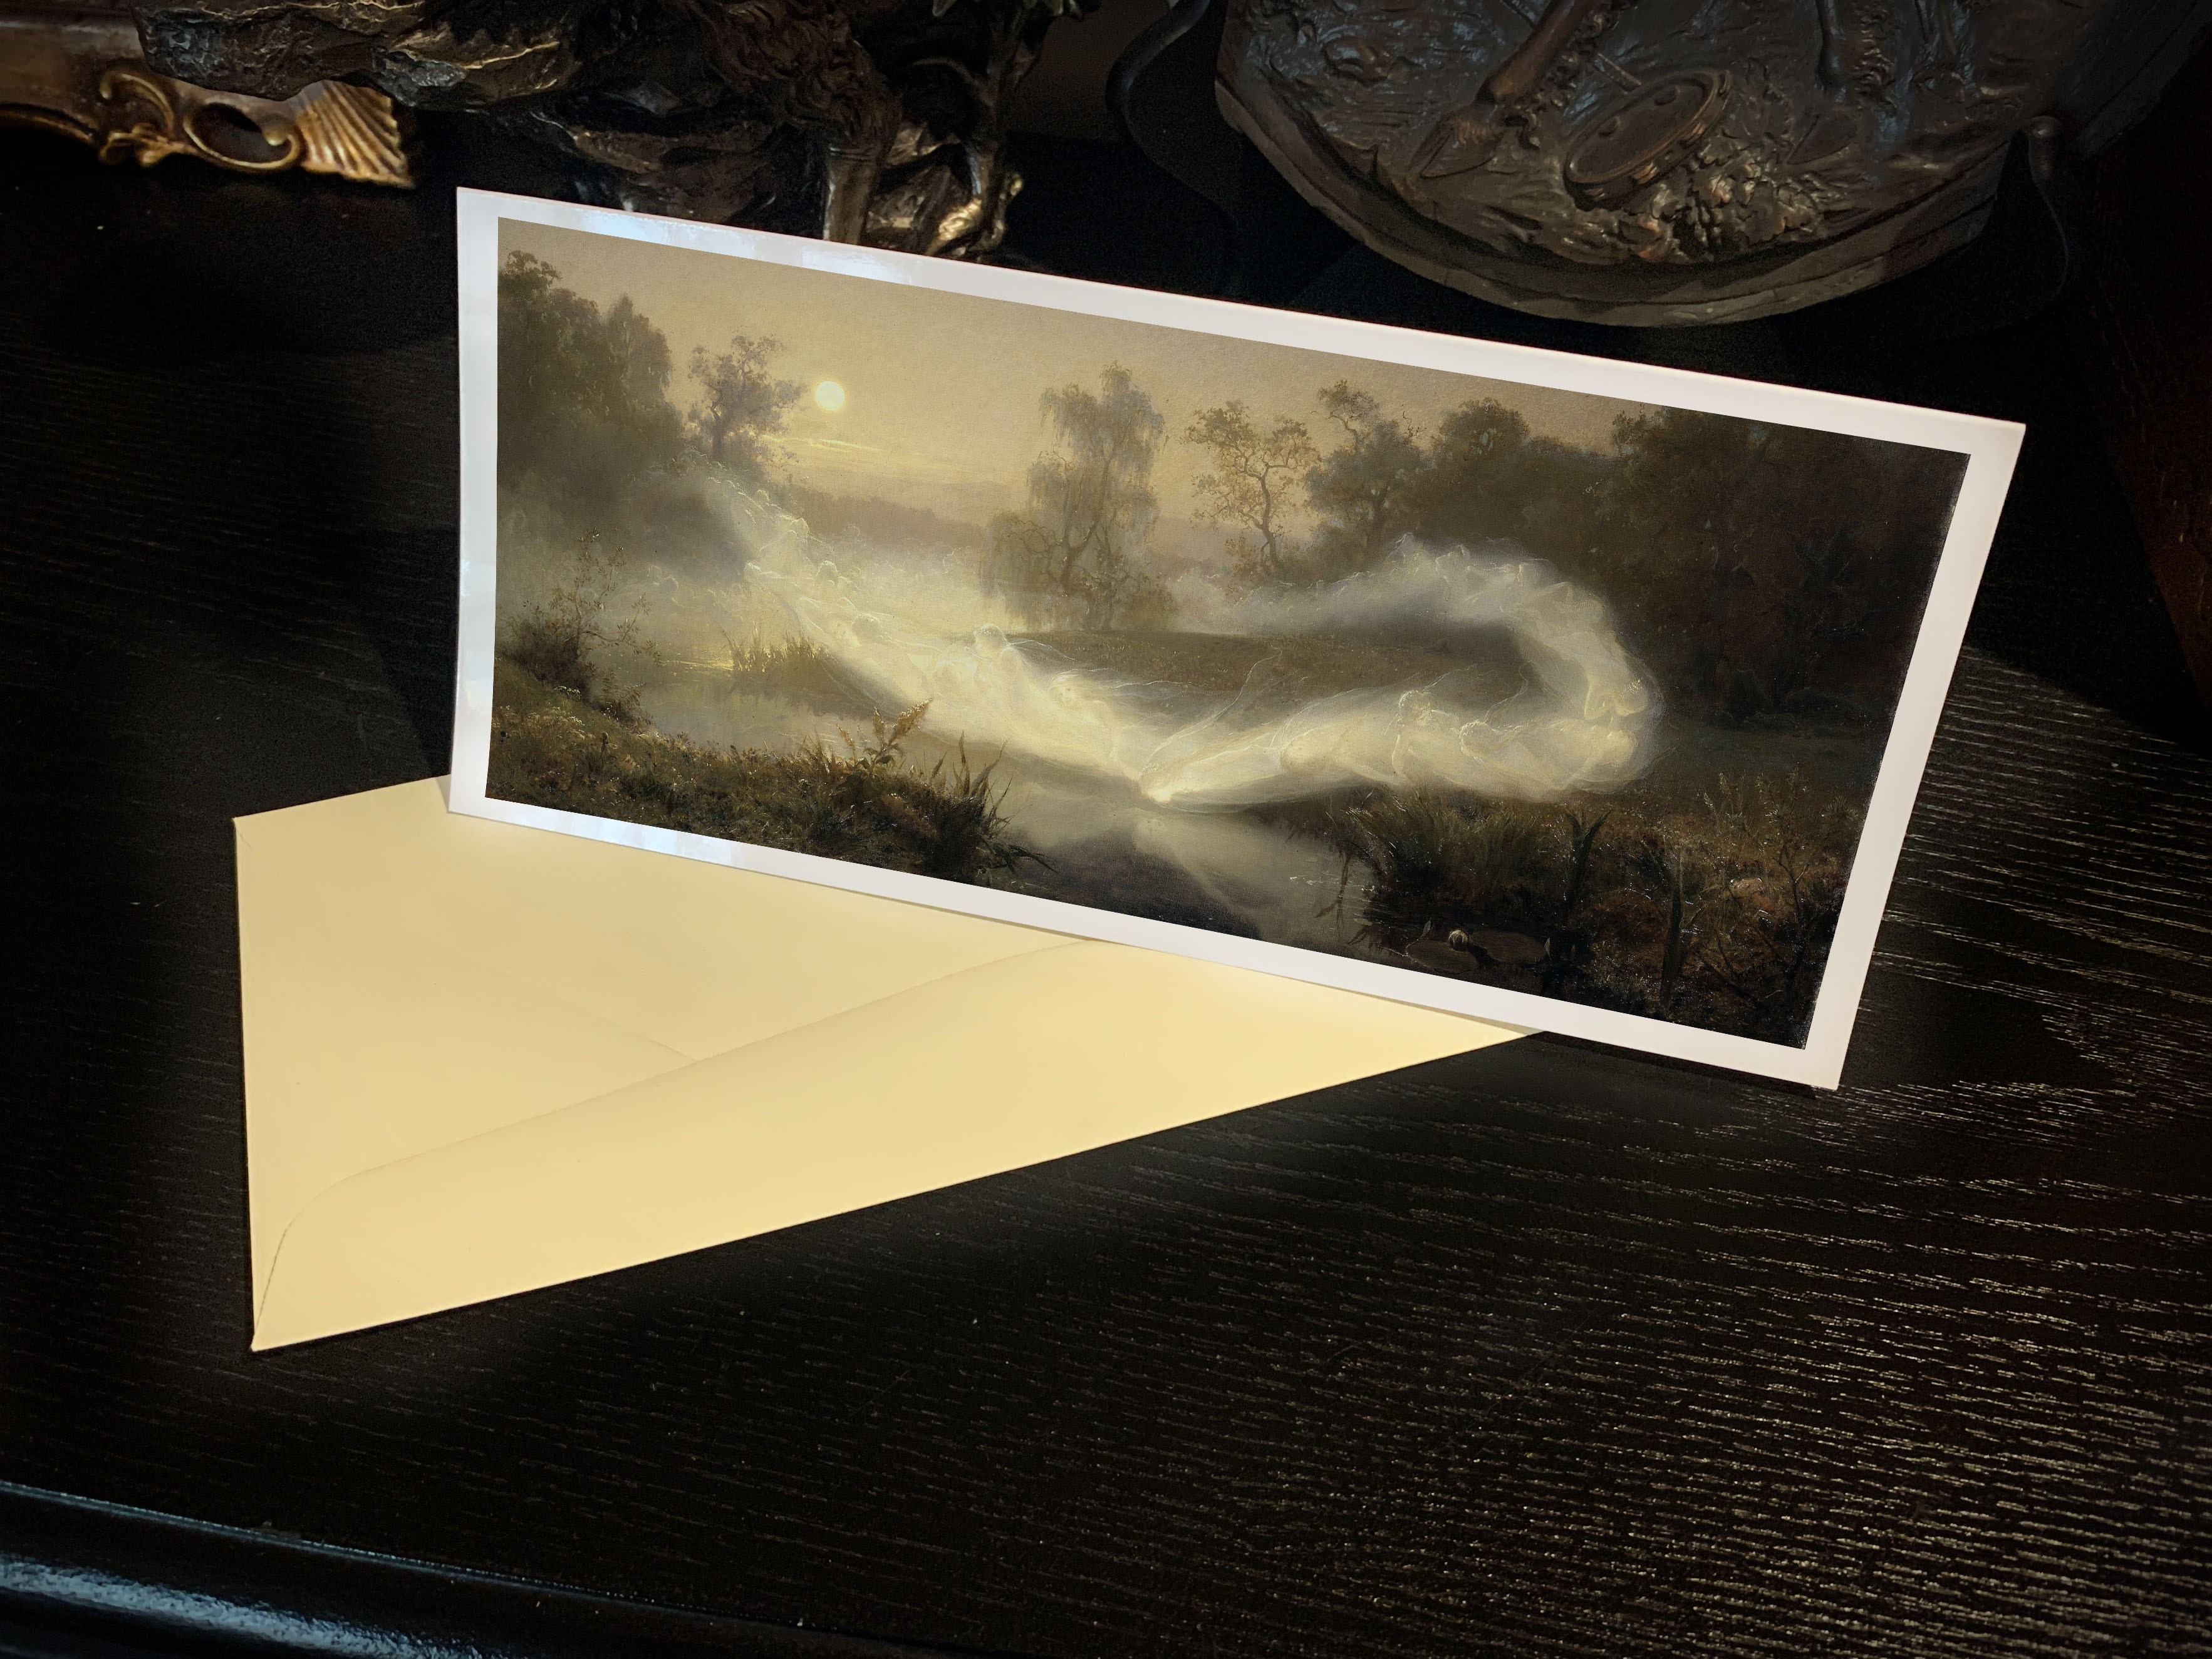 Dancing Fairies by August Malmström, Panoramic Greeting Card/Money Holder with Ivory Envelope